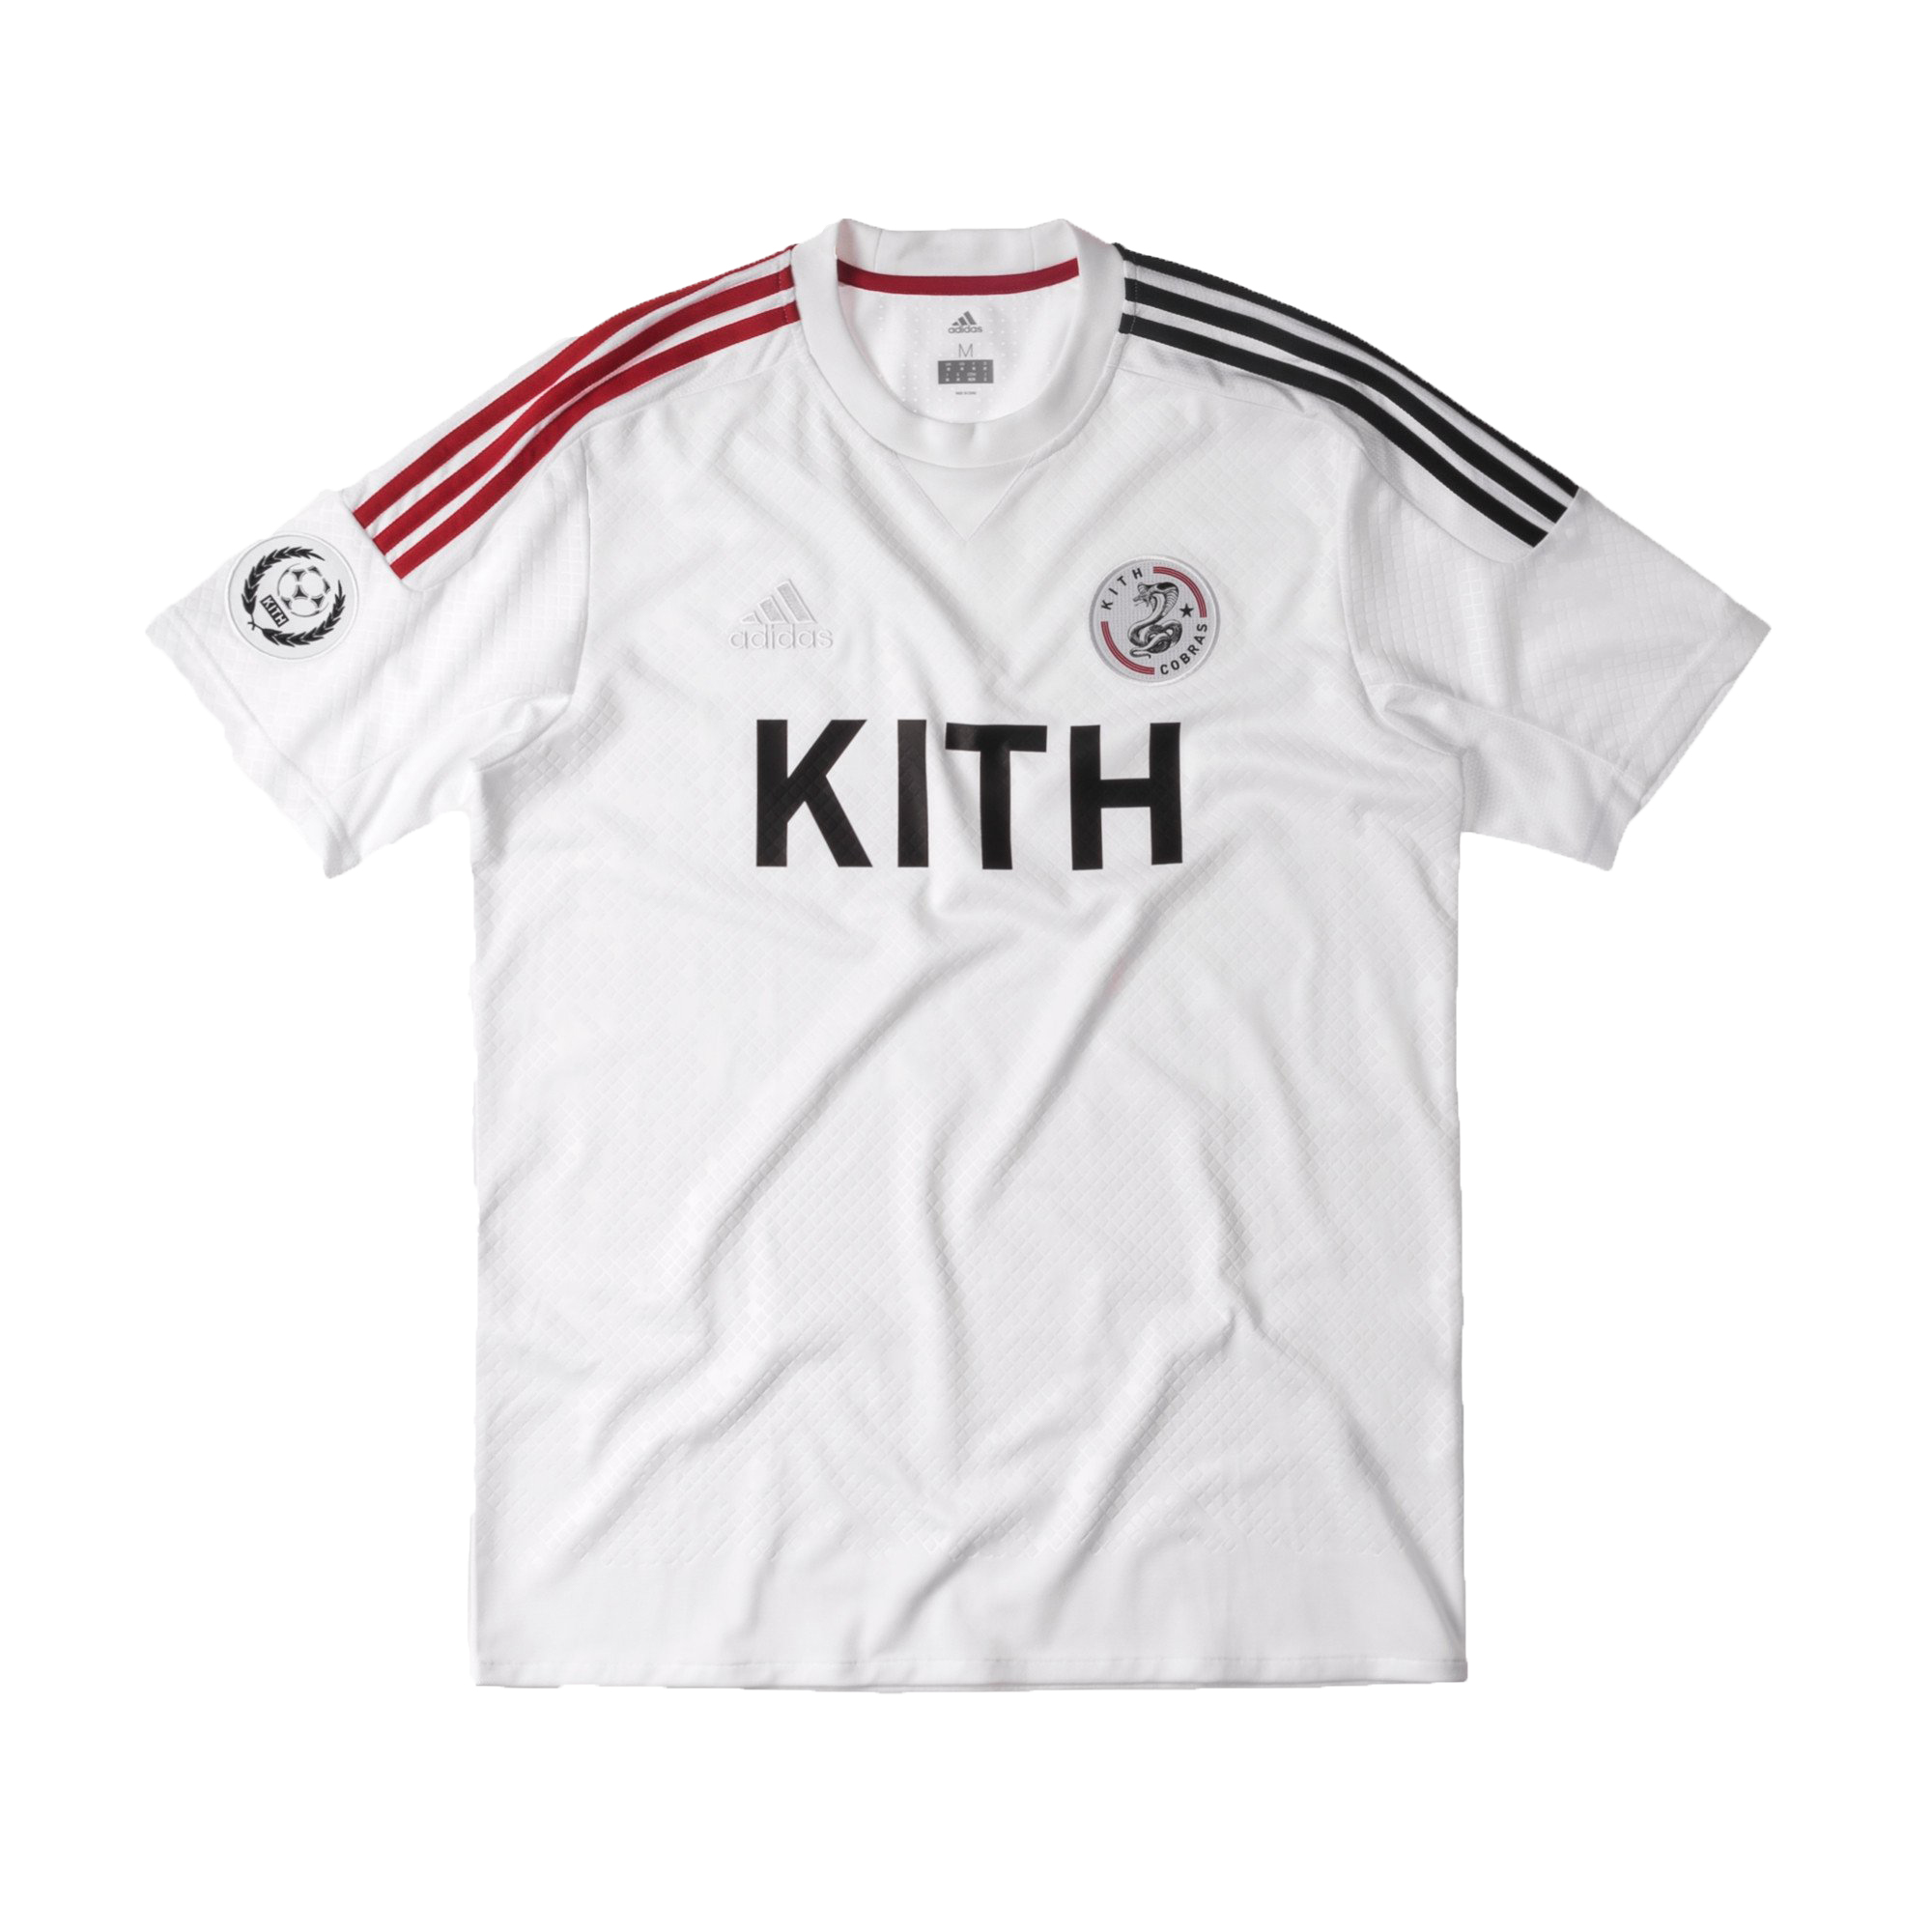 Kith adidas Soccer Cobras Home Game Jersey White Men's - SS17 - US